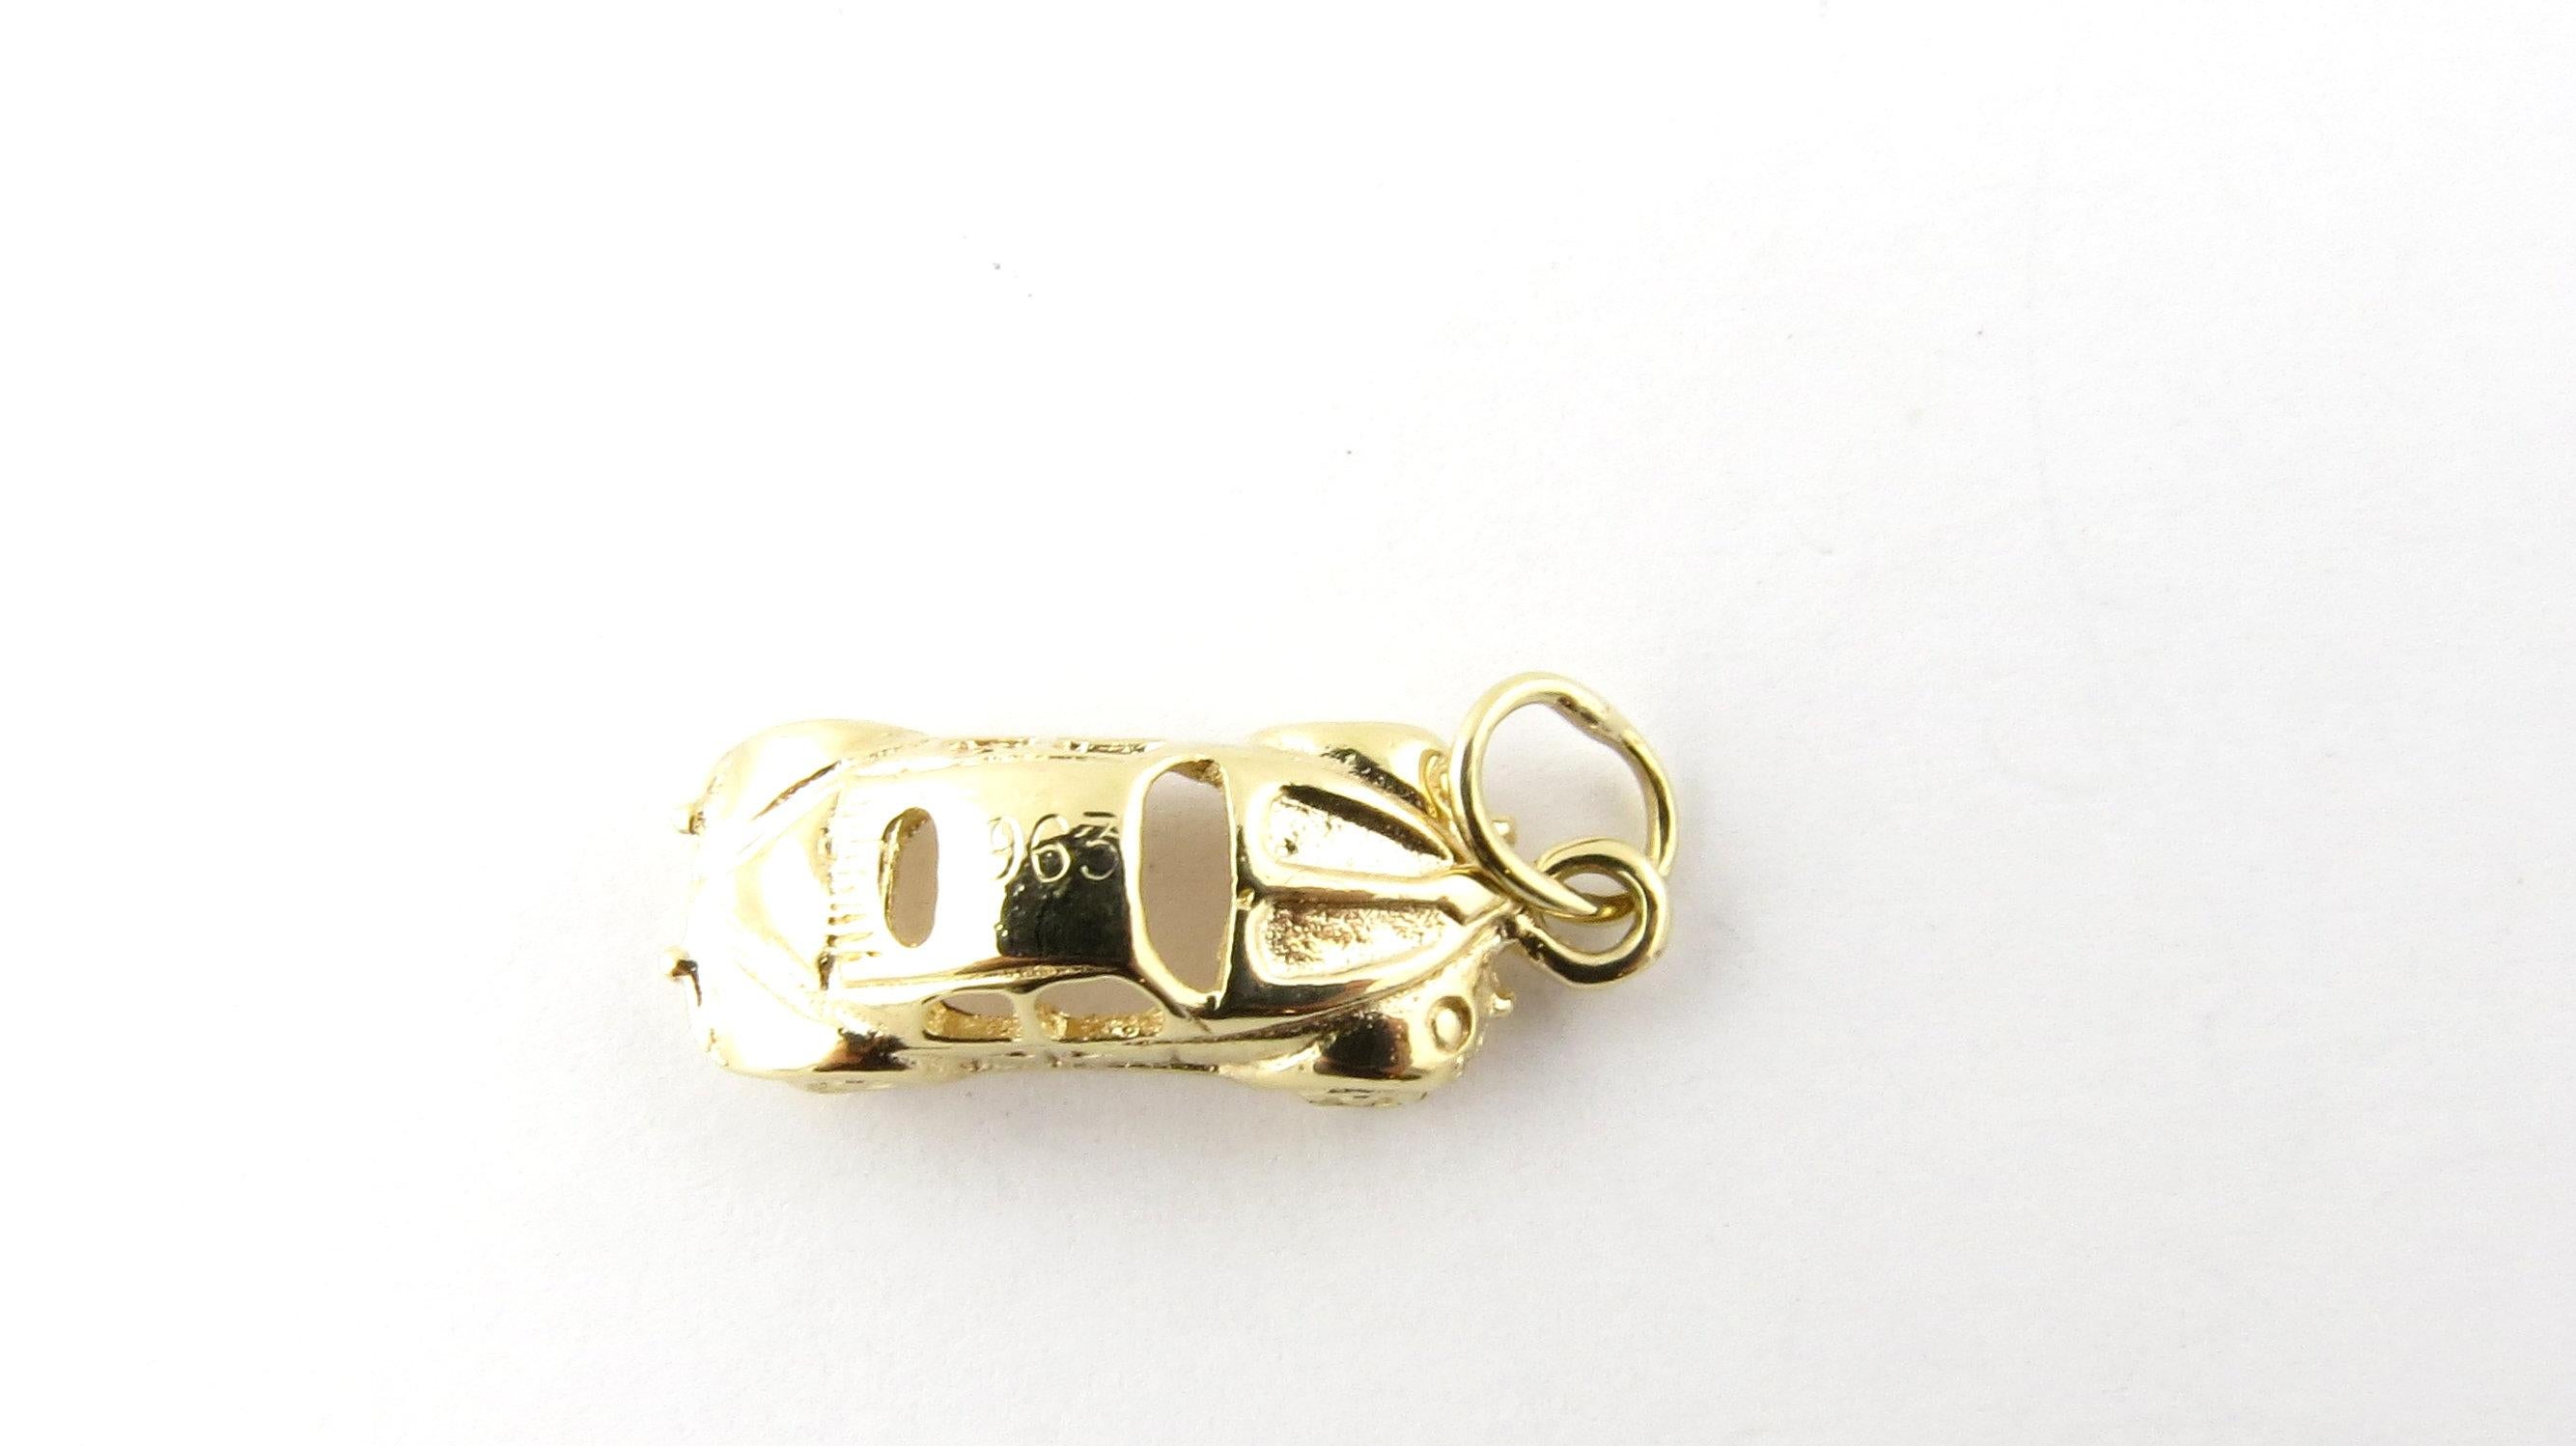 Vintage 14 Karat Yellow Gold 1963 Porsche 911 Charm- 
Perfect gift for the car enthusiast! 
This lovely 3D charm features a miniature Porsche 911 with 